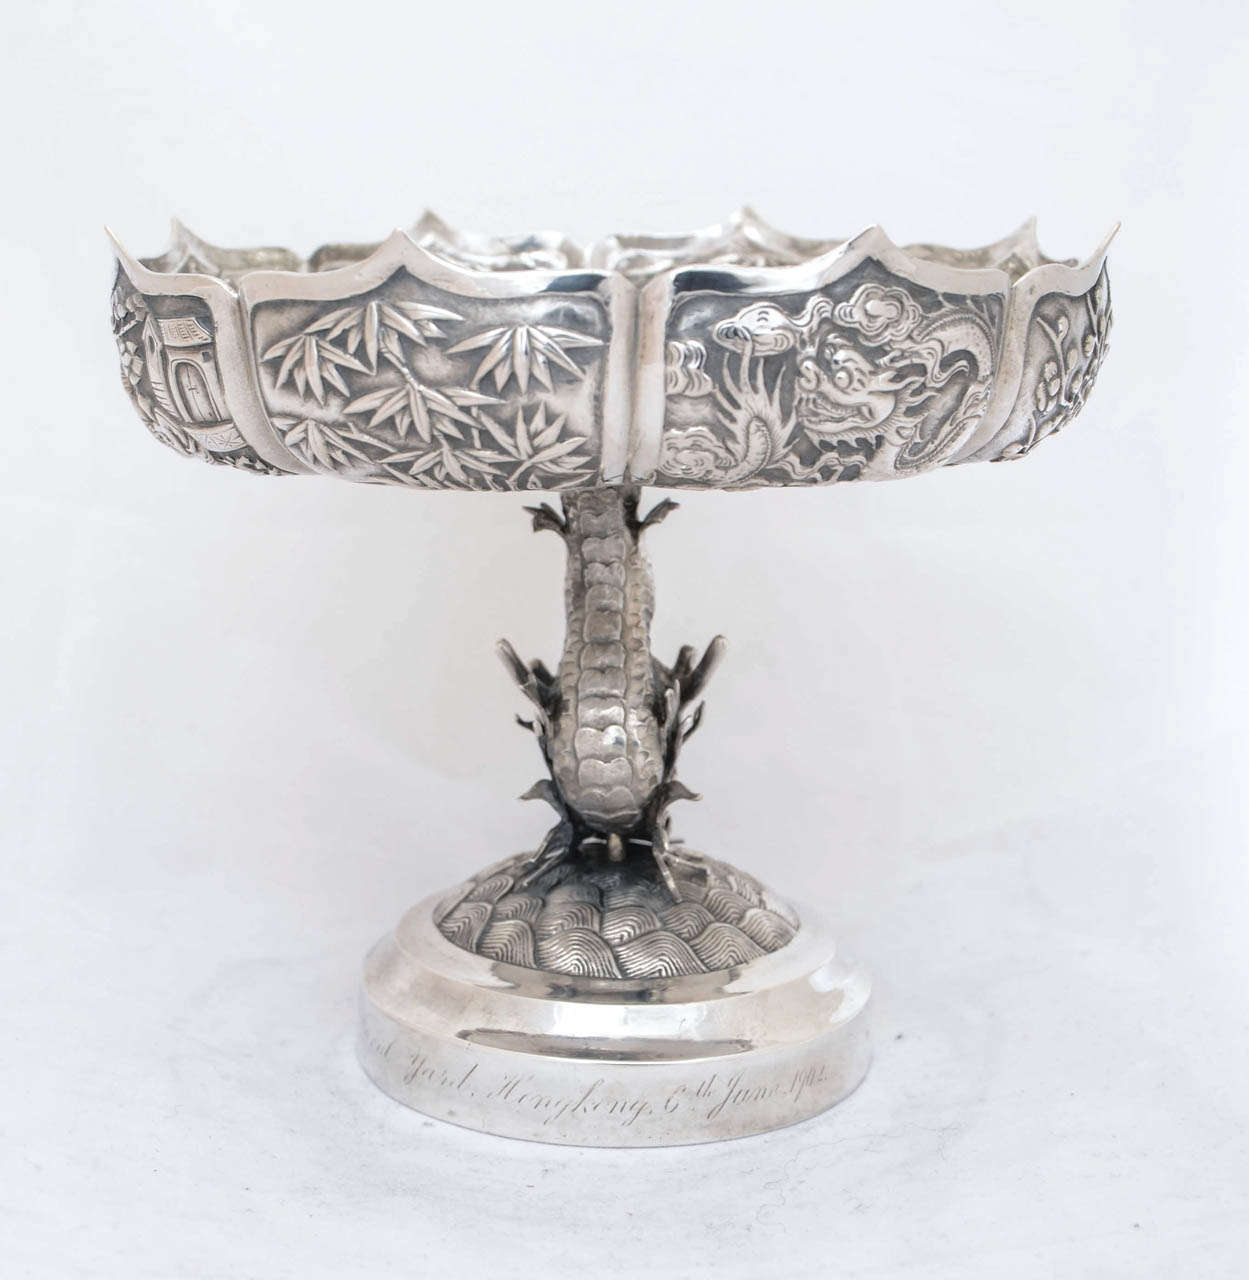 Chinese Export Silver Tazza 1